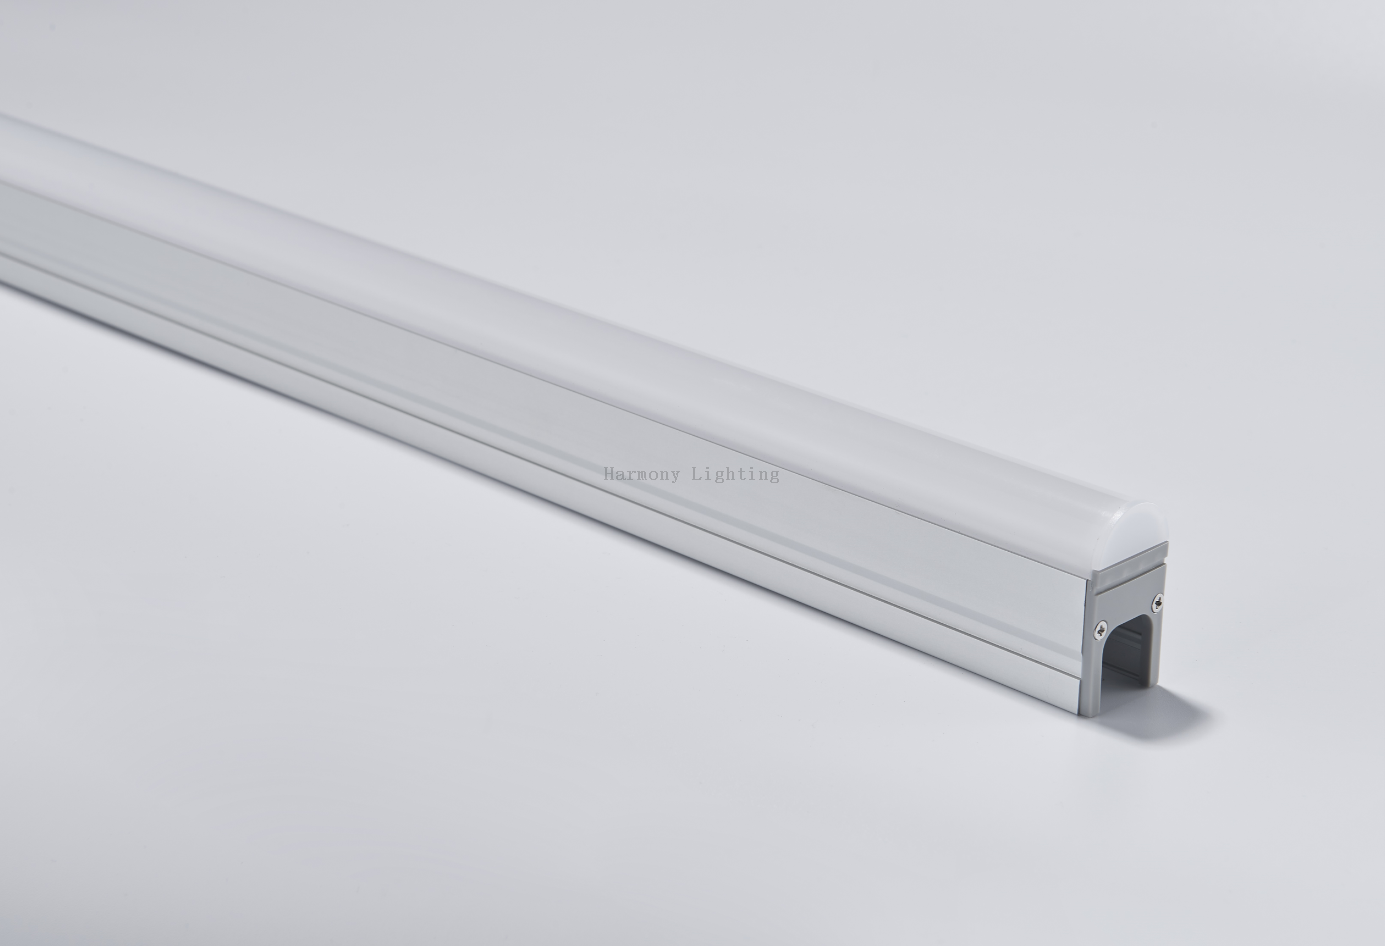 RH-C25 12W IP67 LED Aluminium Profile 10mm Thickness Opal PMMA Diffuser No Darkness Outdoor Linear Lights